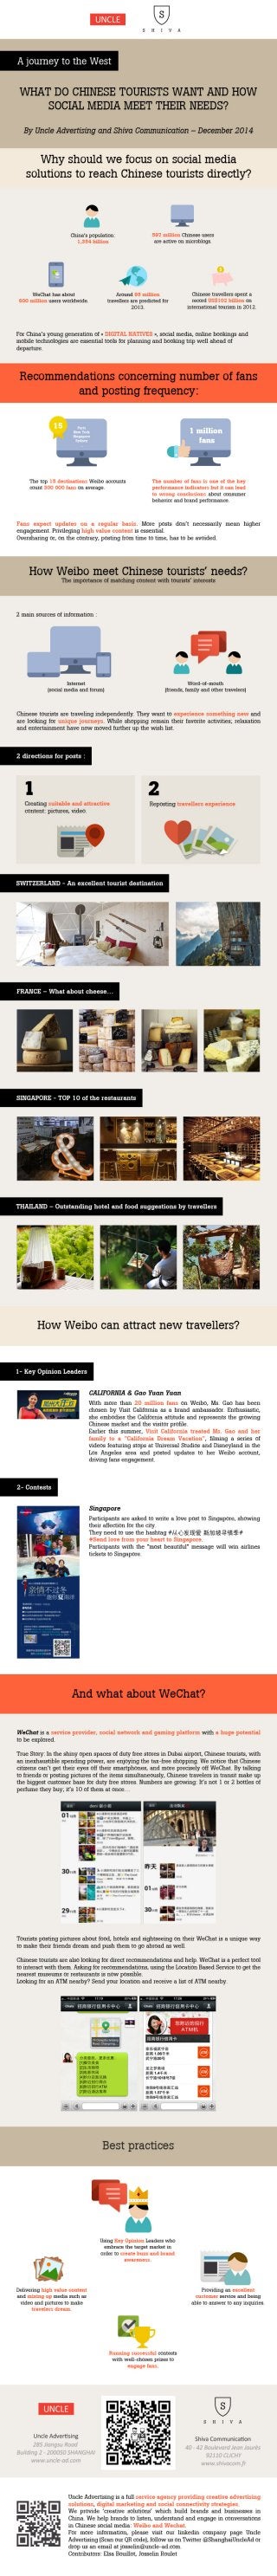 INFOGRAPHIC | A journey to the West: What do Chinese tourists want and how social media meet their needs?